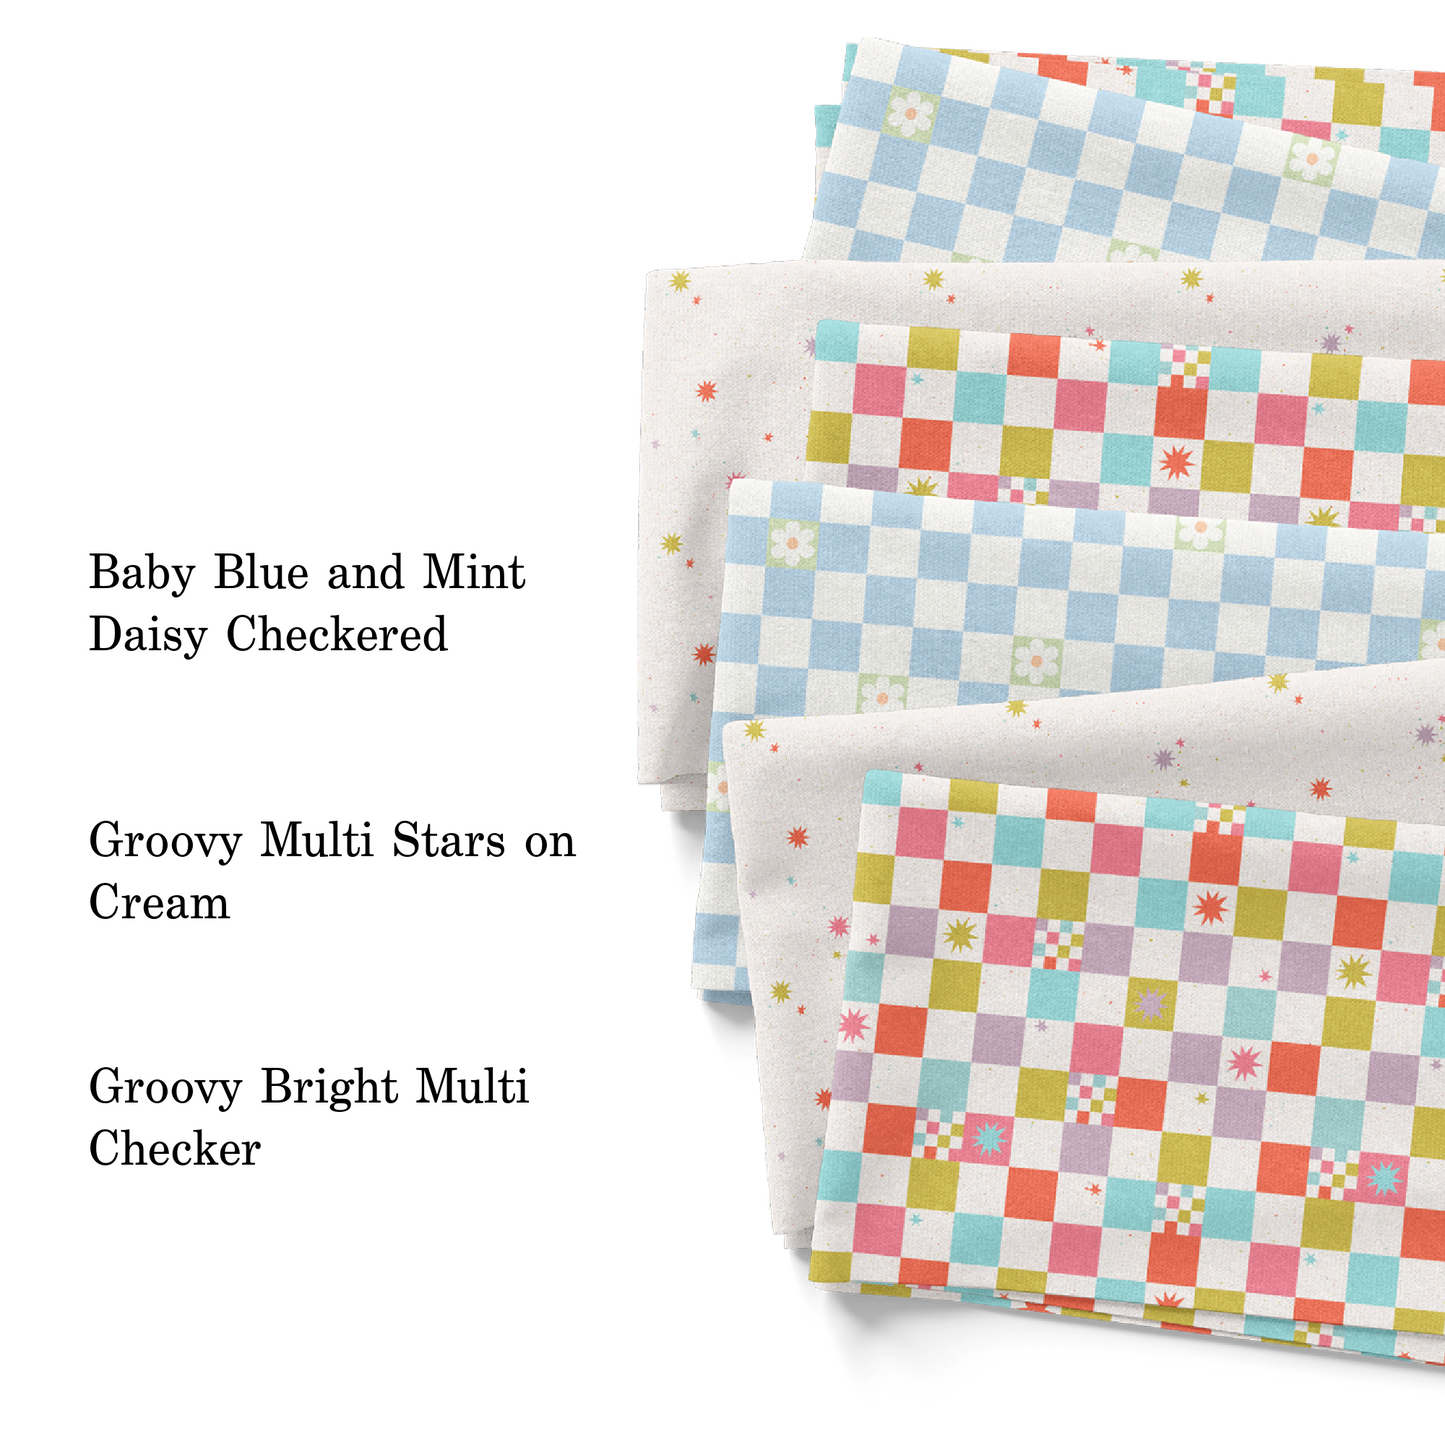 Baby Blue and Mint Daisy Checkered Fabric By The Yard